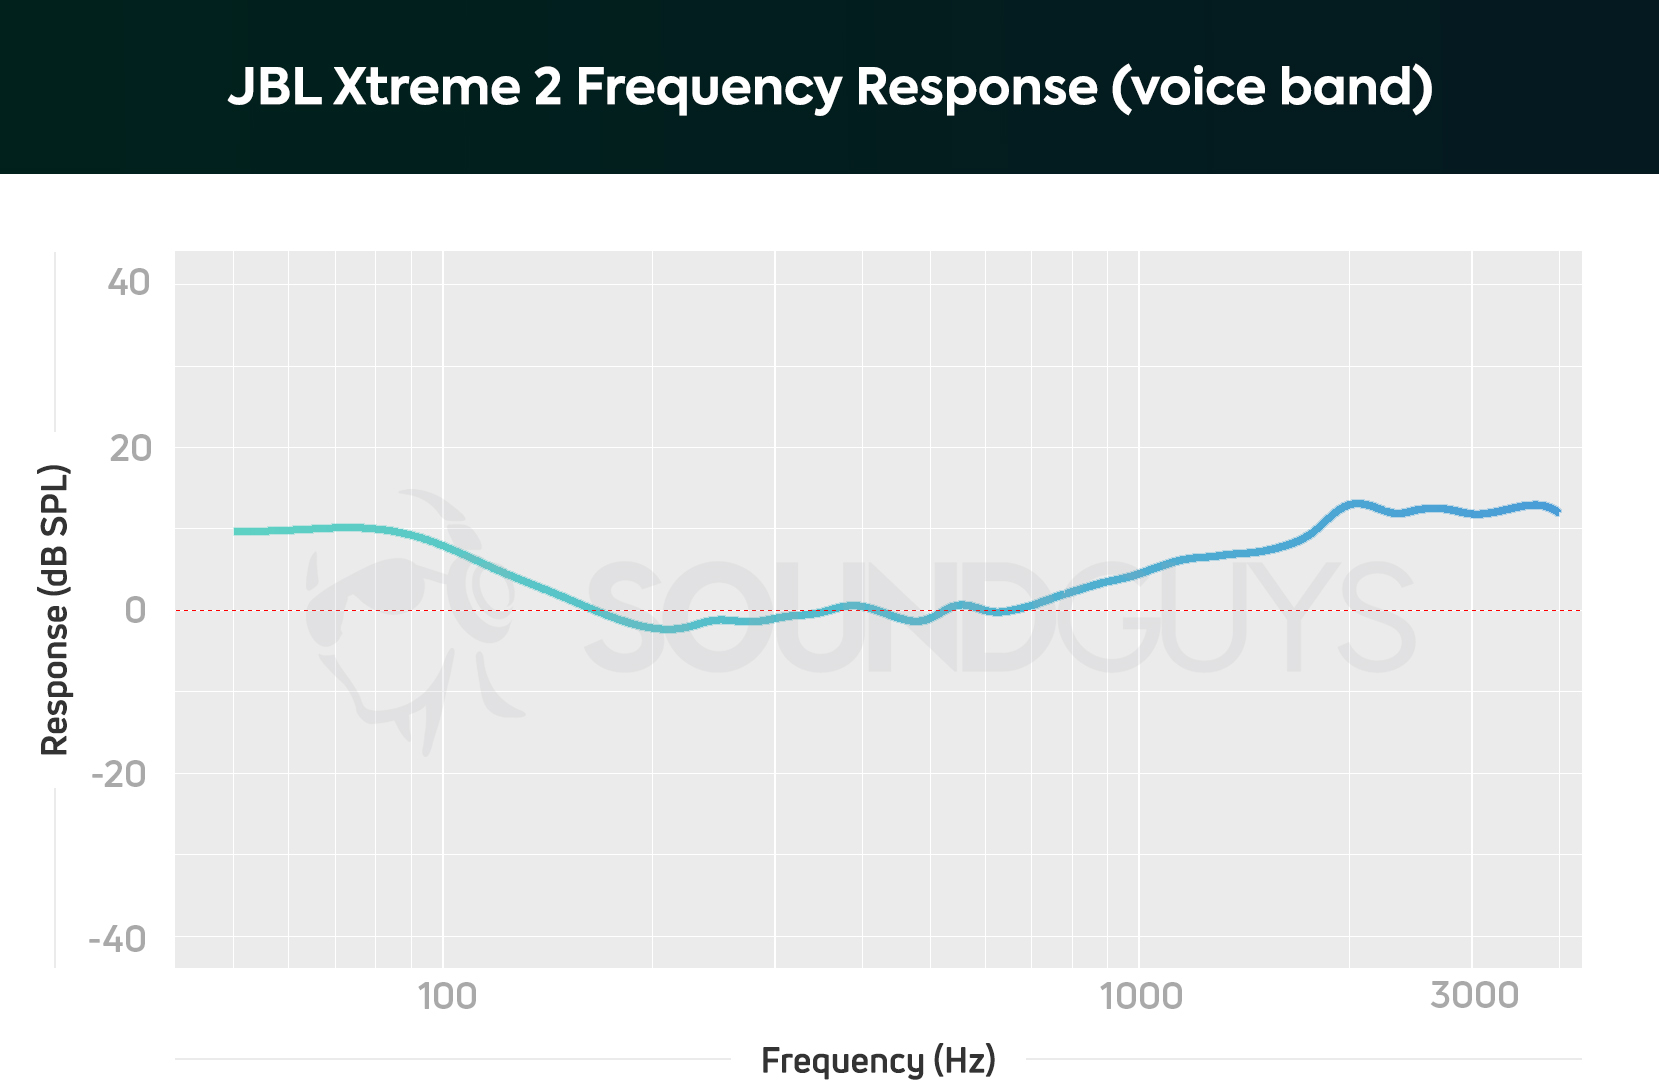 A chart showing the JBL Xtreme 2 Frequency Response (voice band)